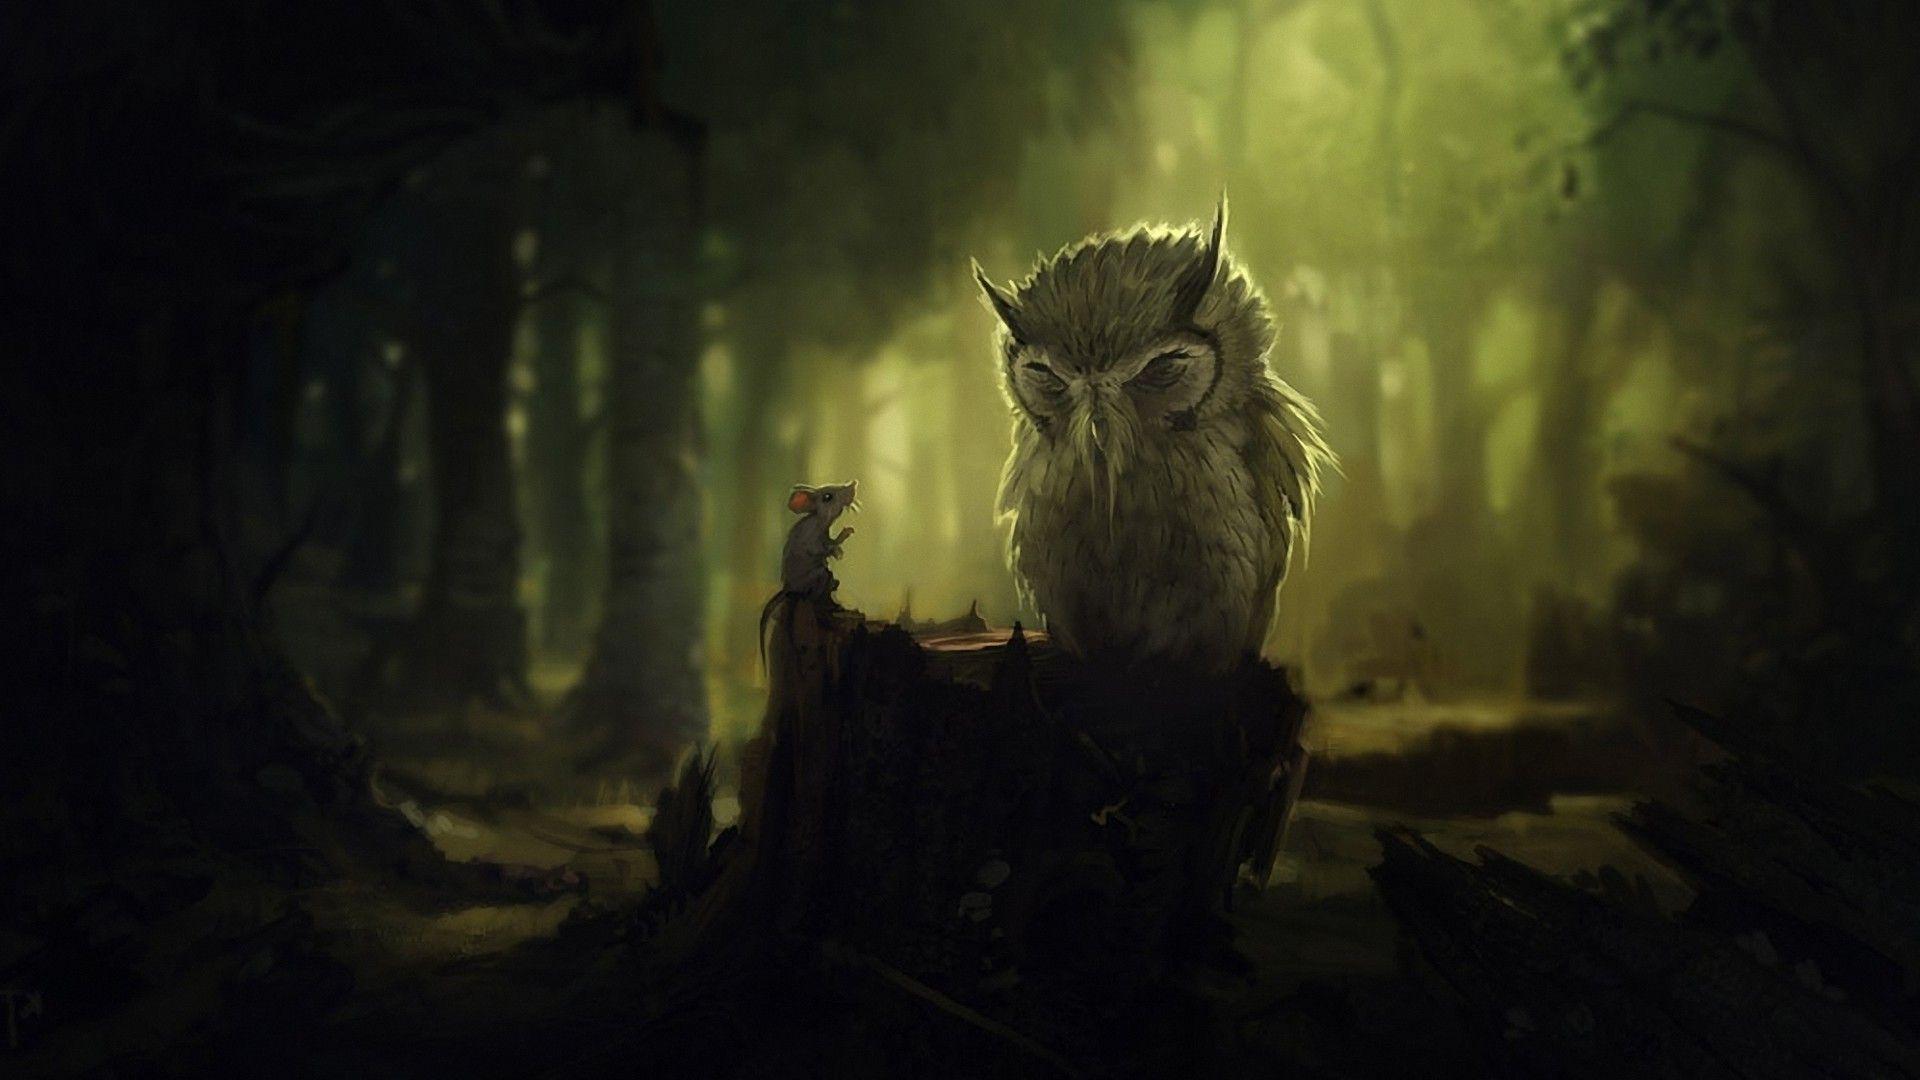 Mouse and owl in the dark forest Wallpaper #